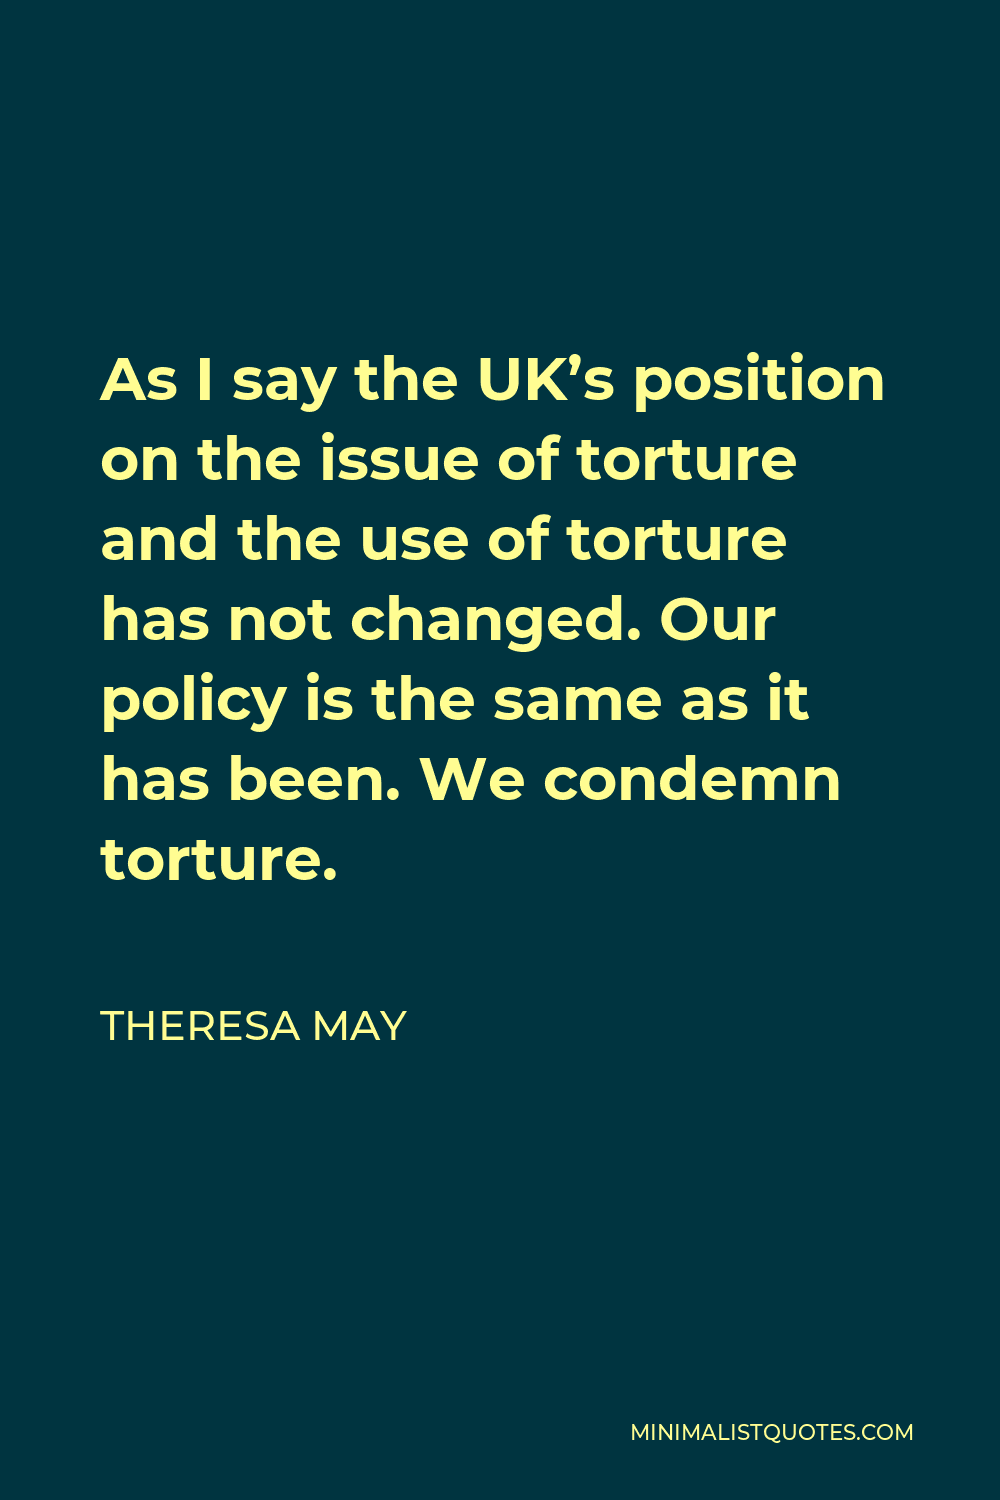 Theresa May Quote - As I say the UK’s position on the issue of torture and the use of torture has not changed. Our policy is the same as it has been. We condemn torture.